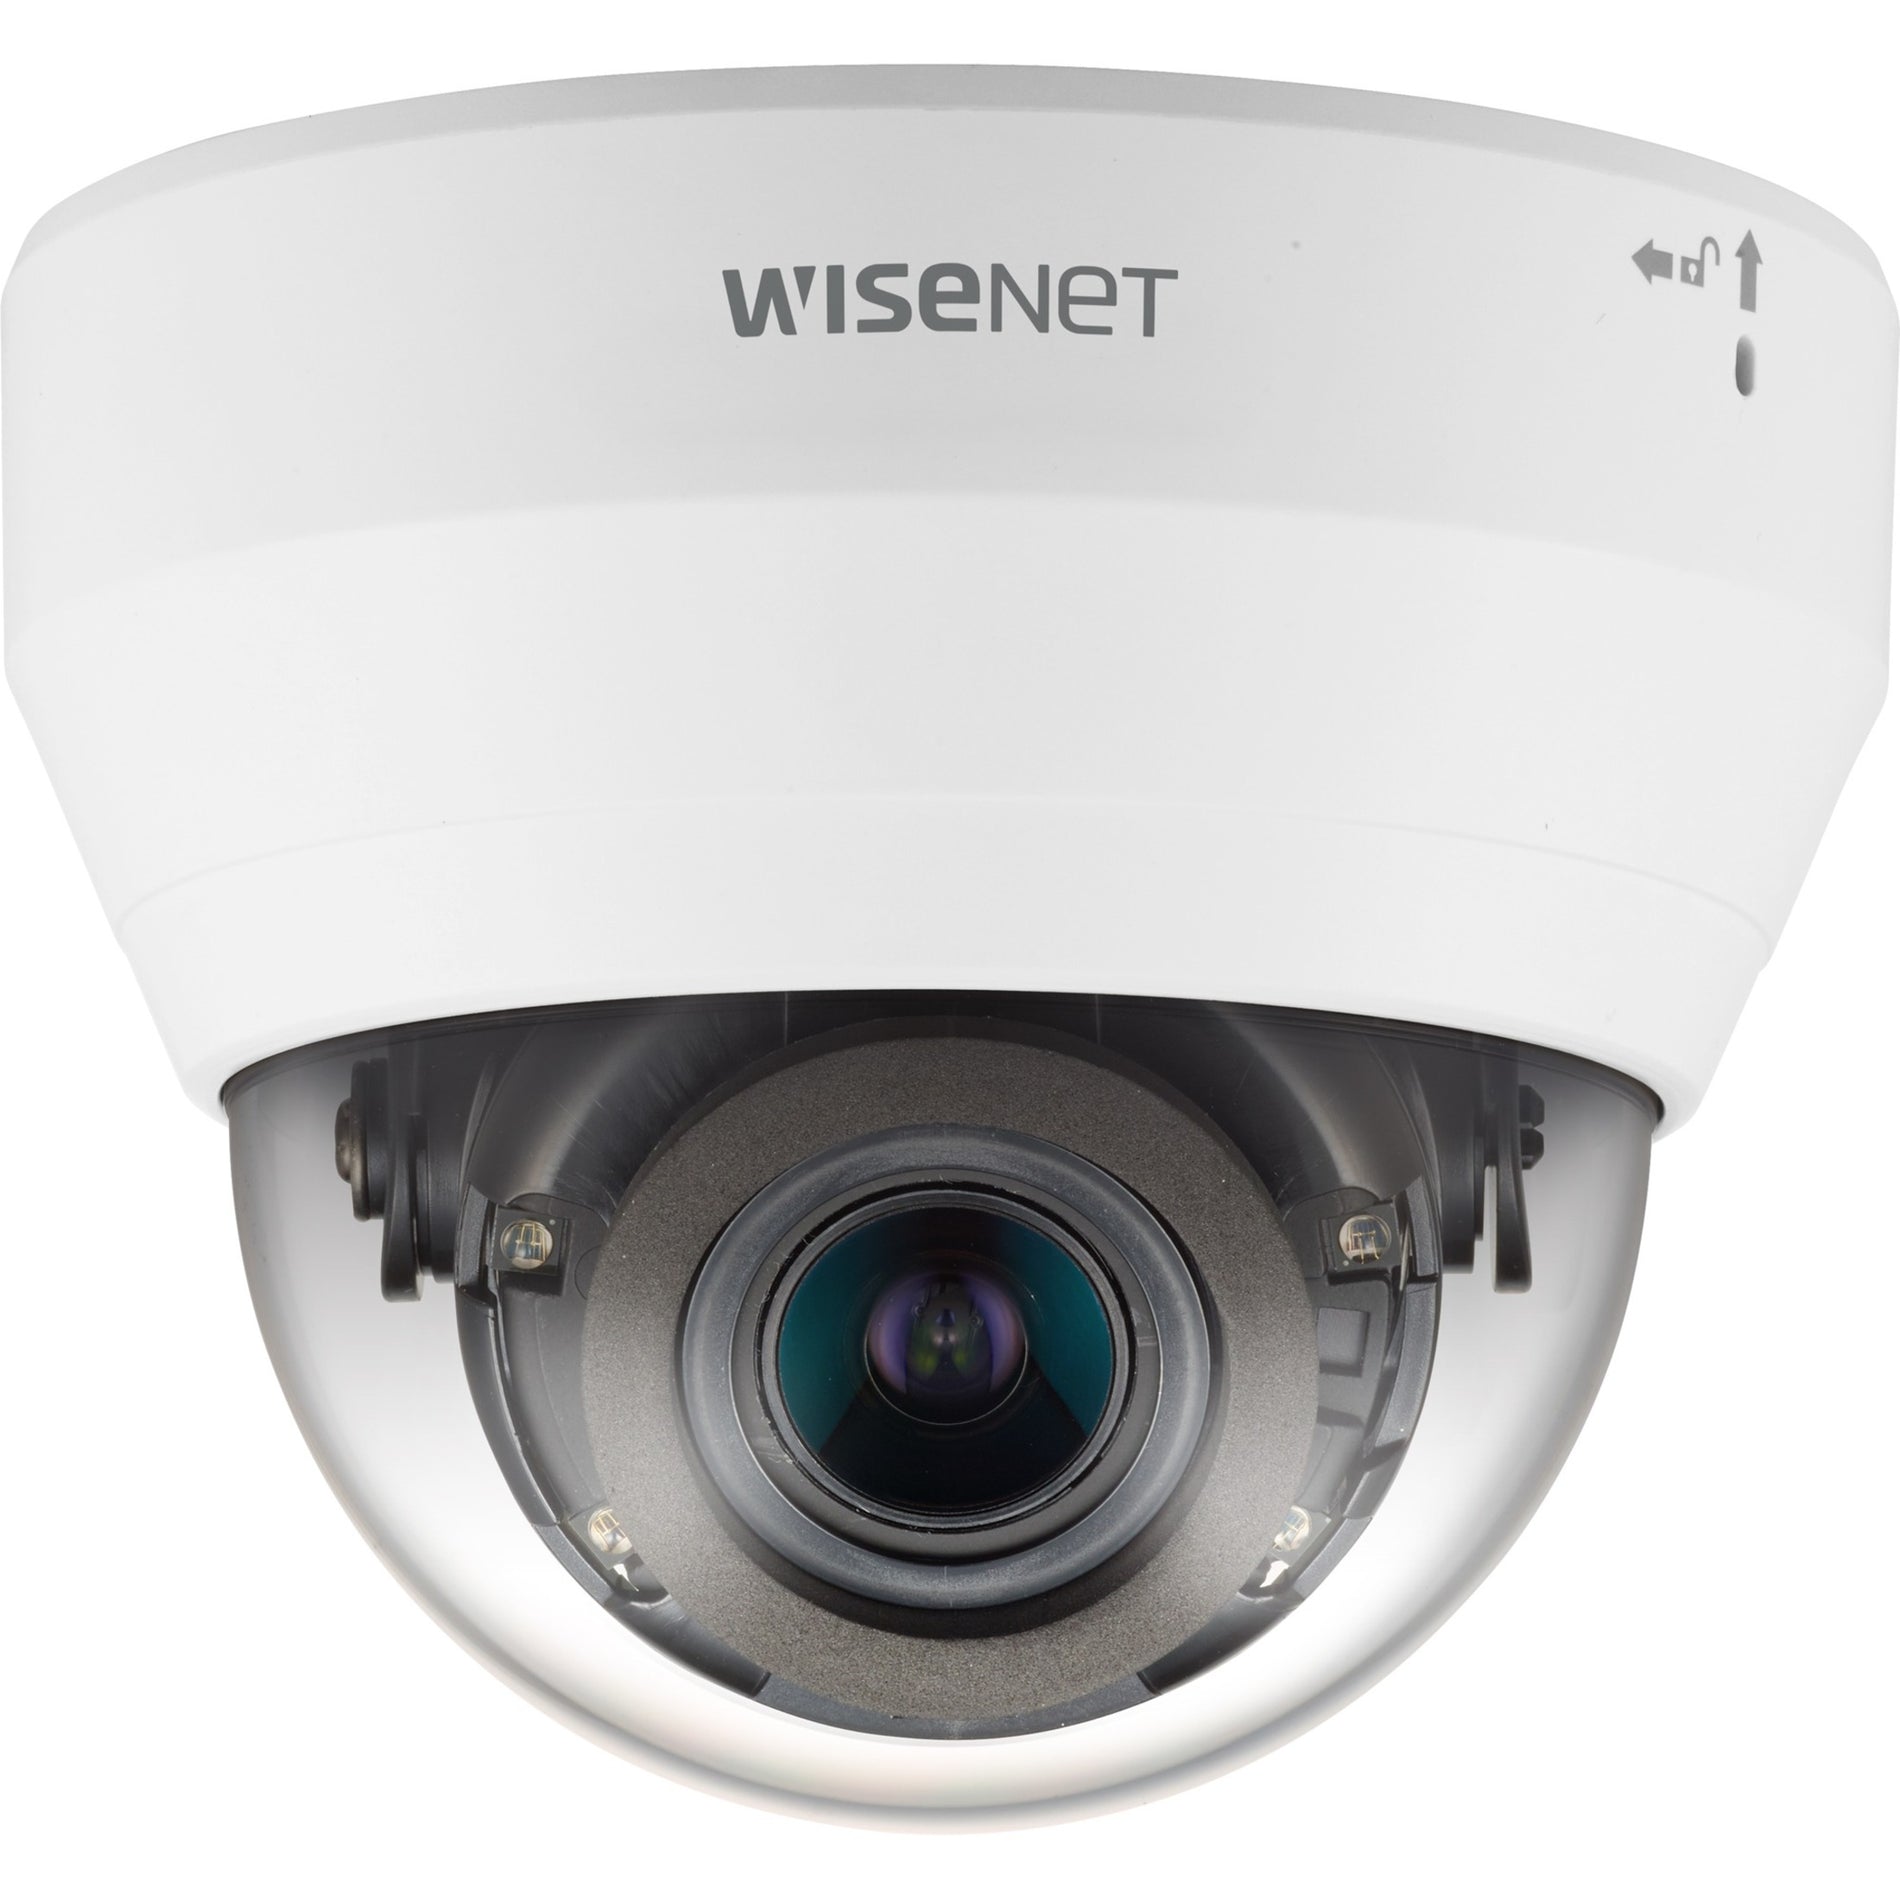 Wisenet QND-6082R1 2MP IR Indoor Dome, Full HD, Infrared Night Vision, Wide Dynamic Range, Motion Detection